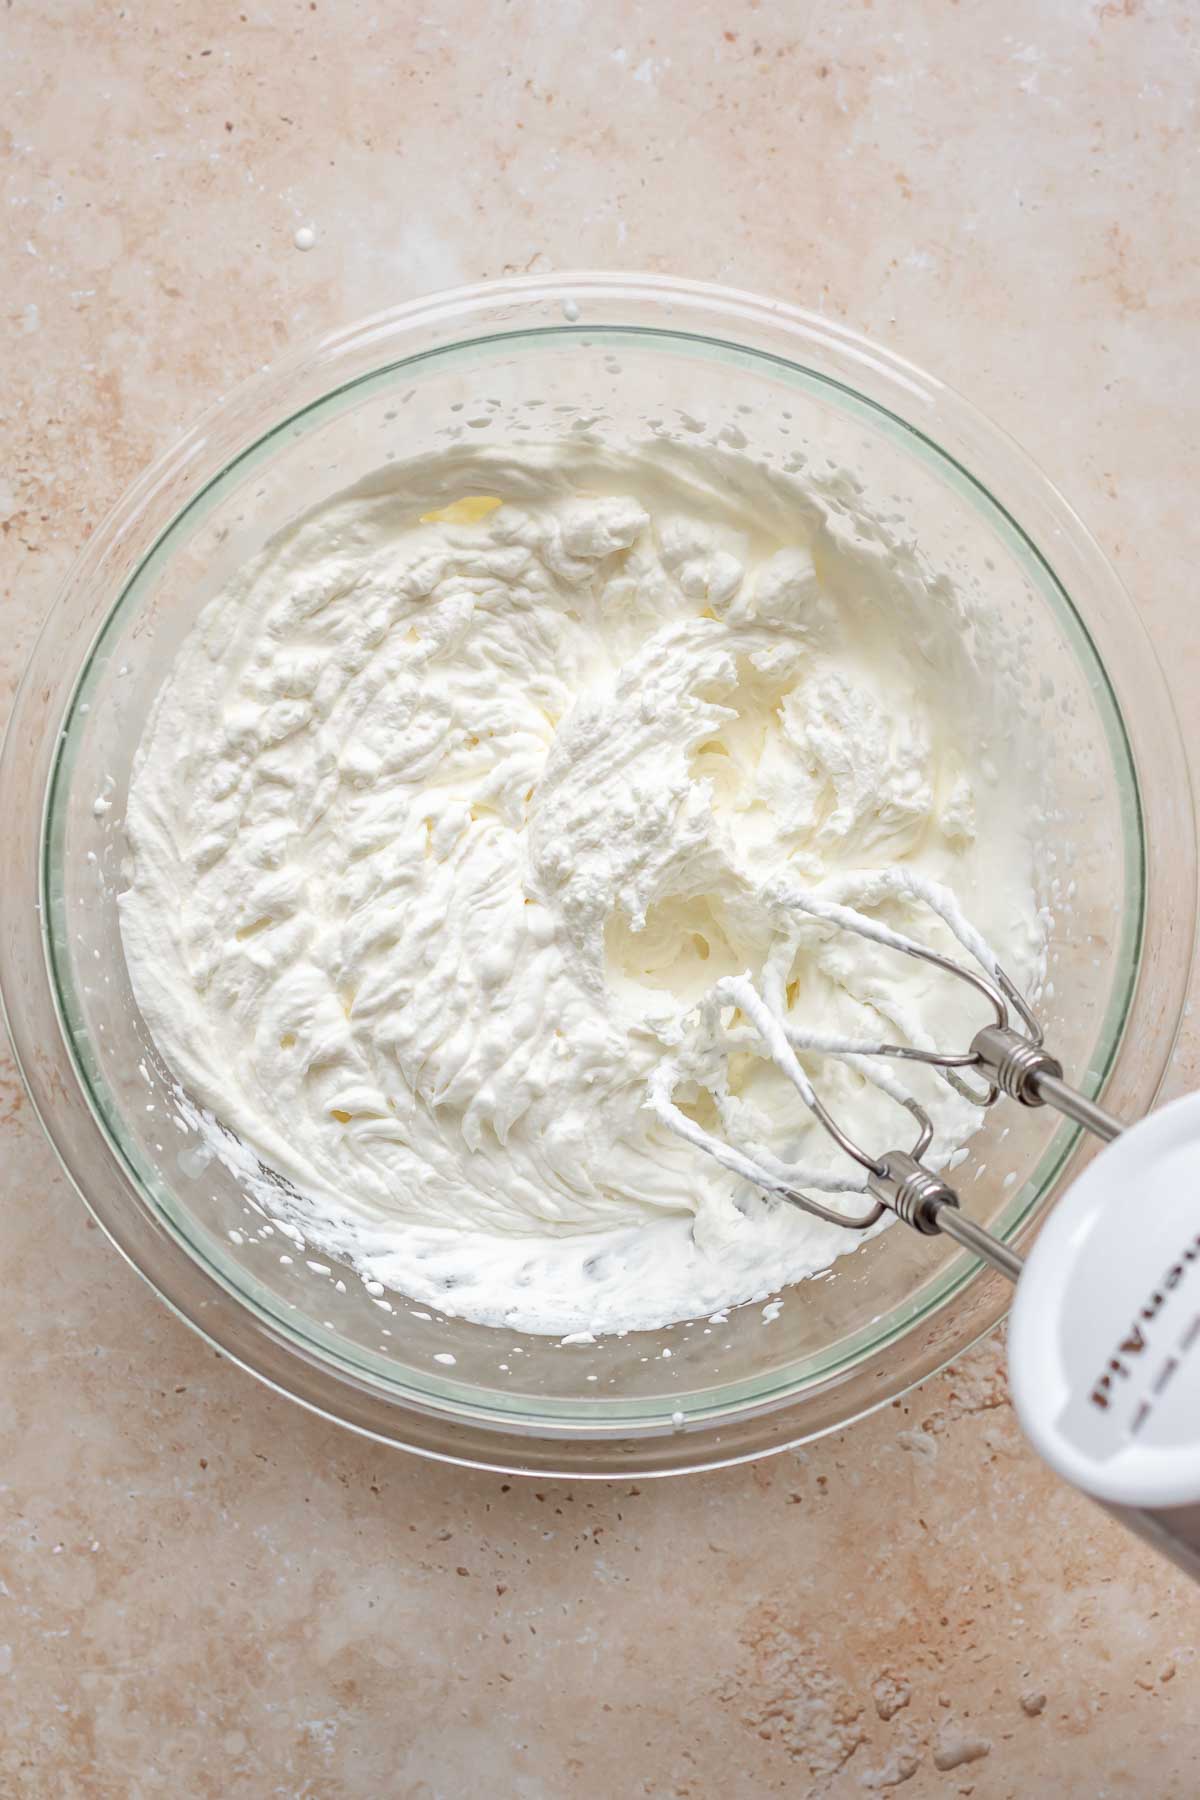 A hand mixer mixes whipped cream in a bowl.